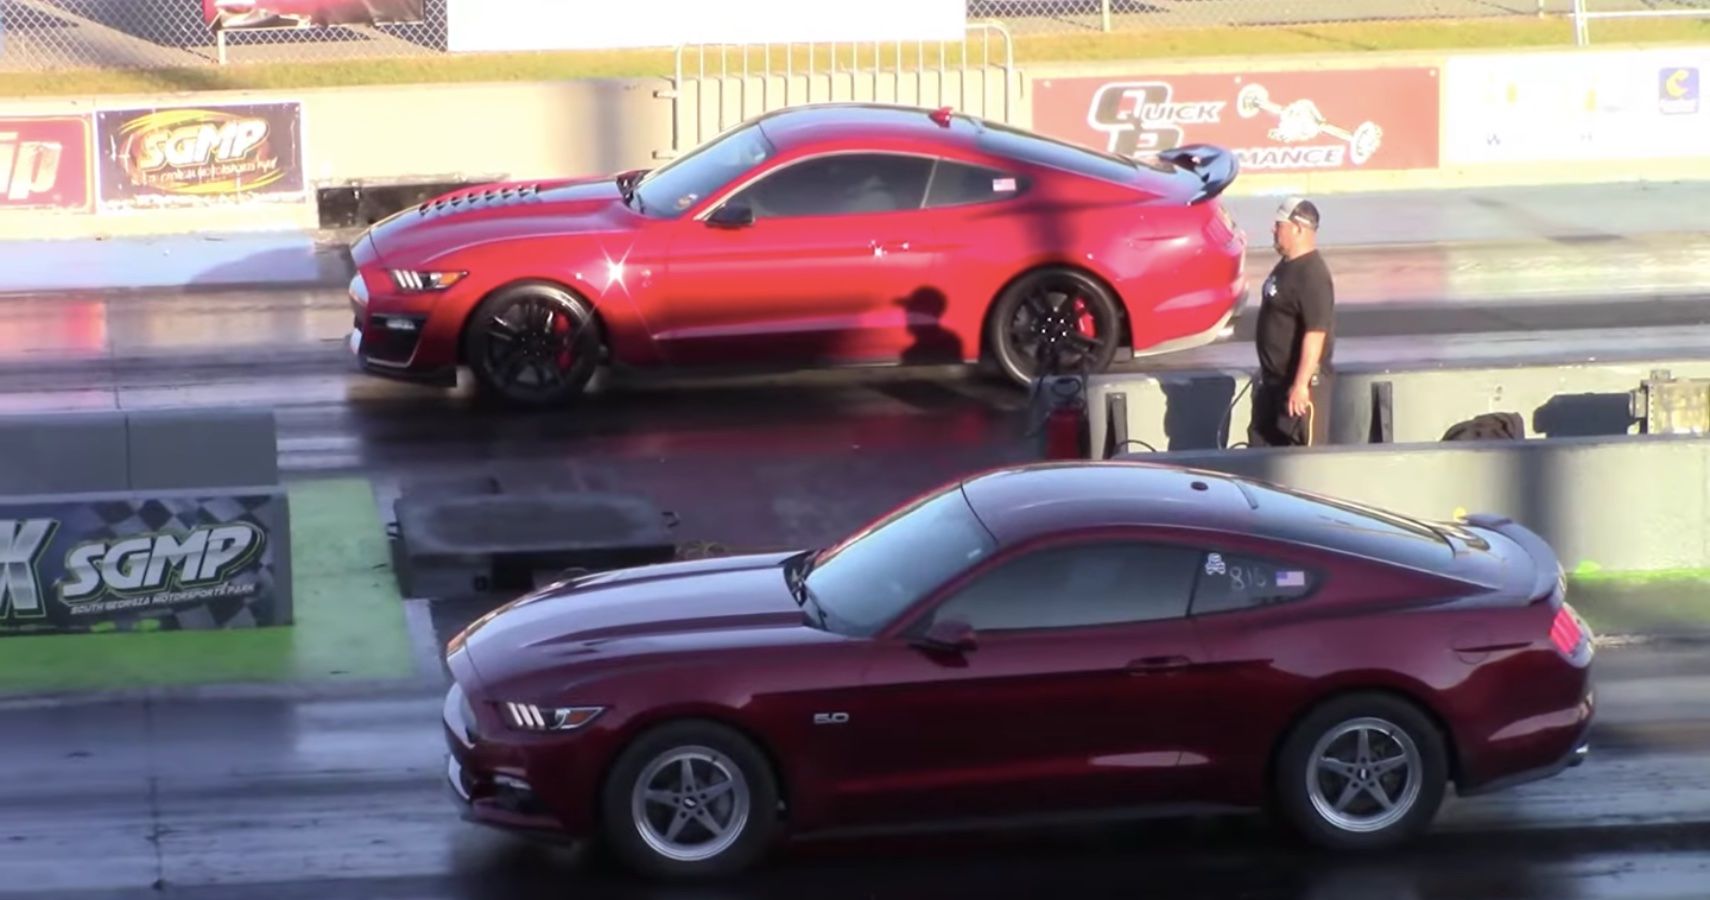 Ford Mustang Drag Race, cars side by side